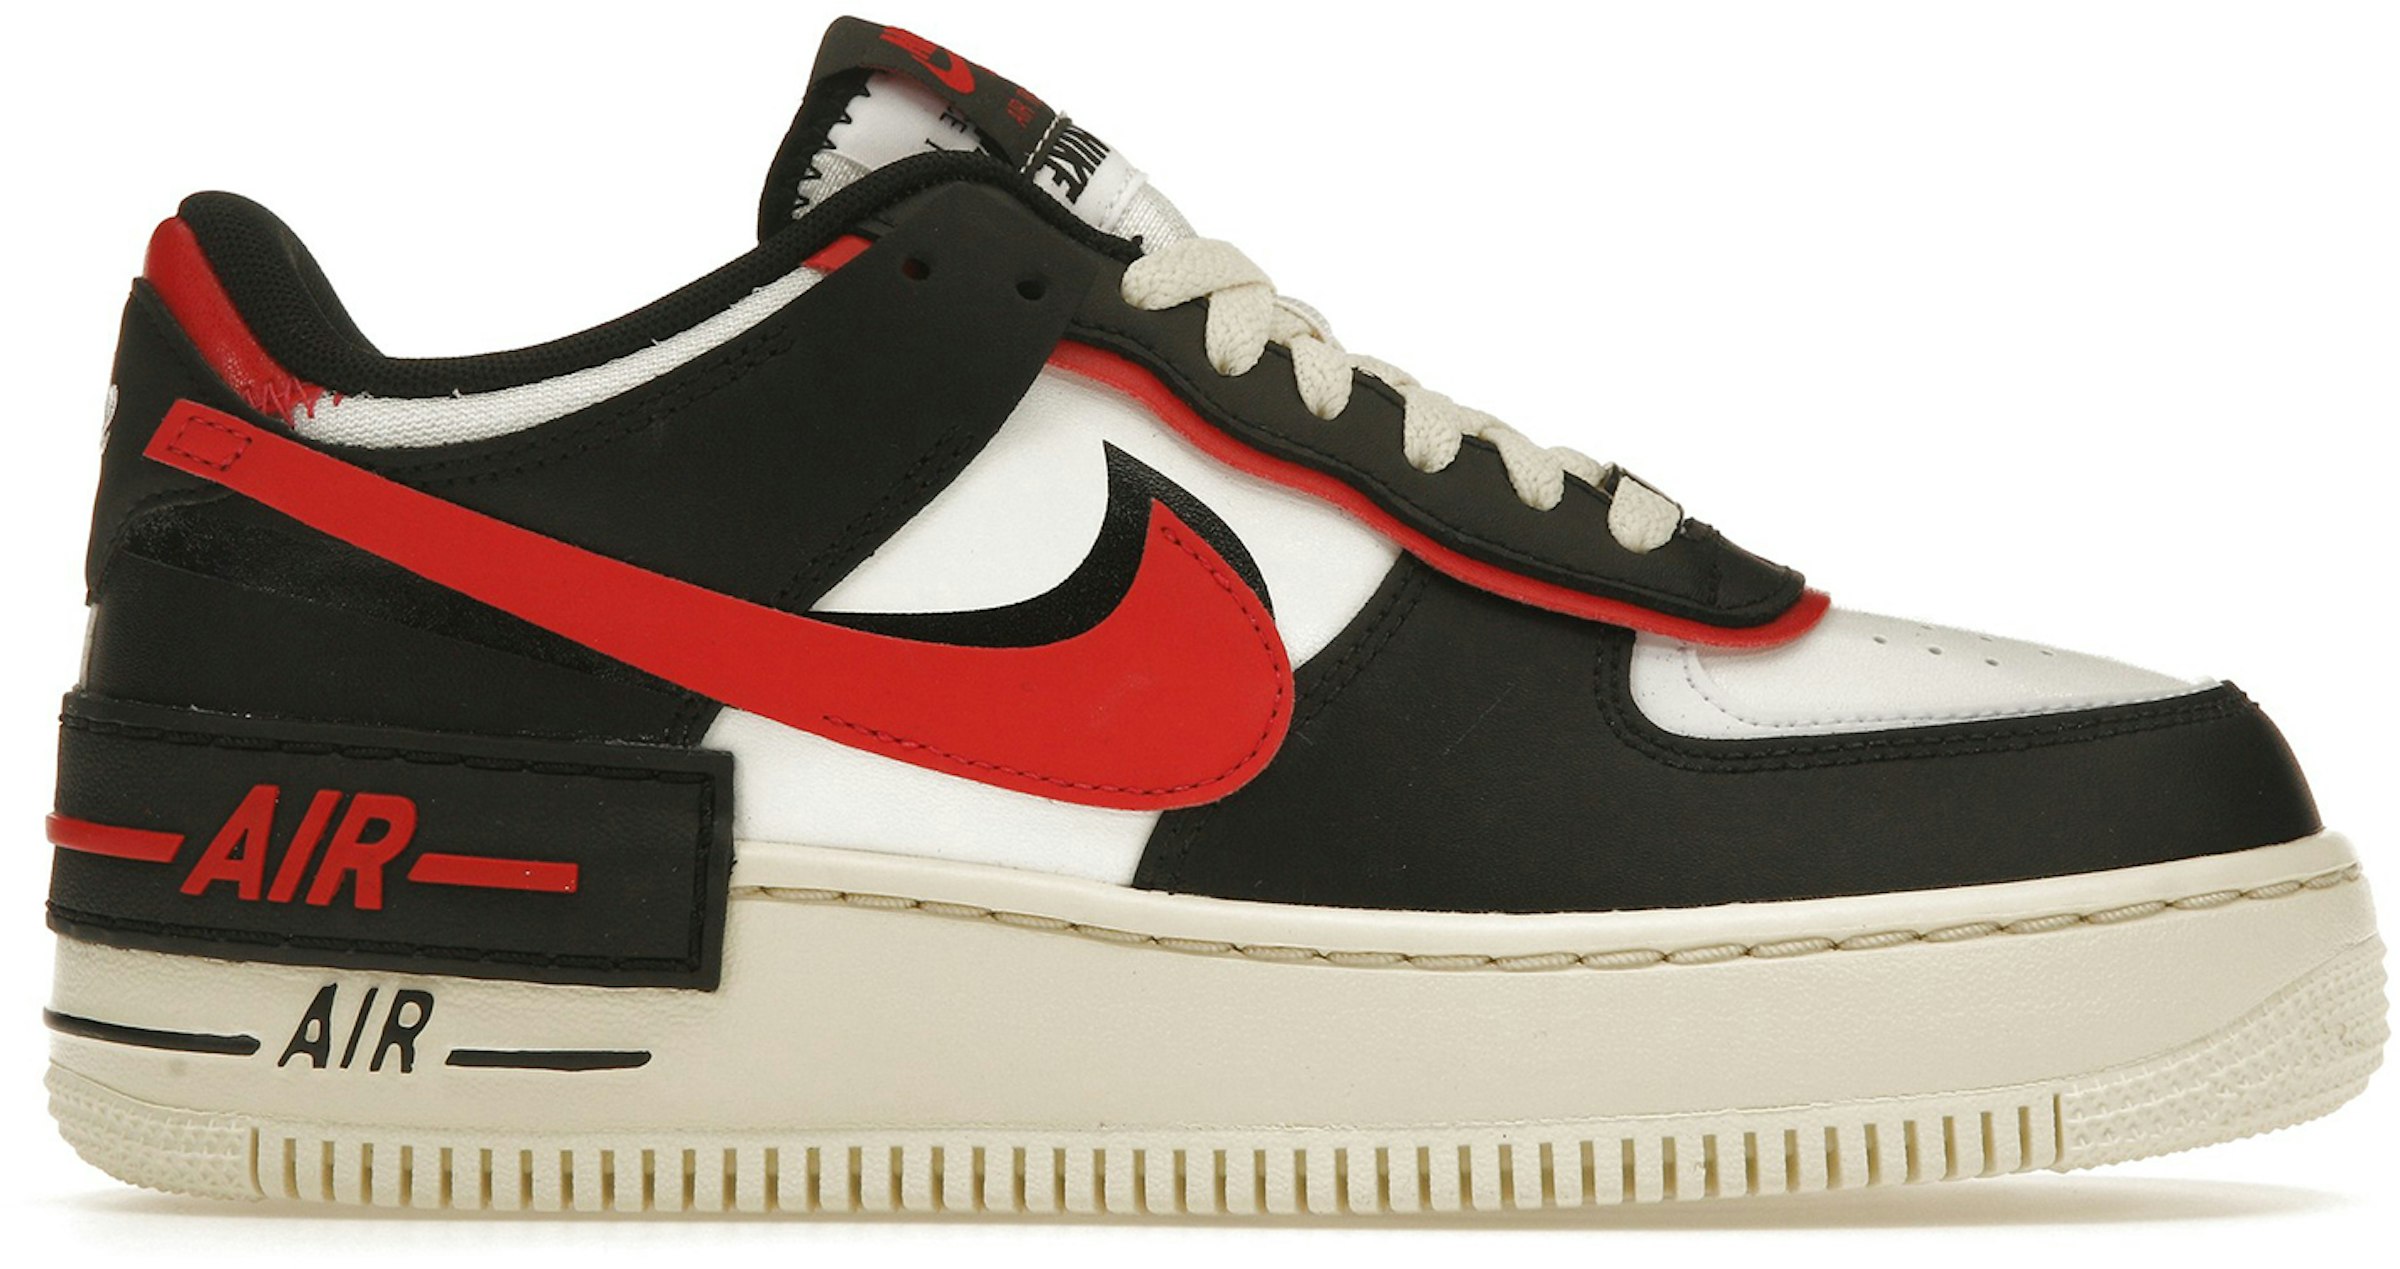 Nike Air Force Low Shadow Summit White University Red Black (Women's) - DR7883-102 - US